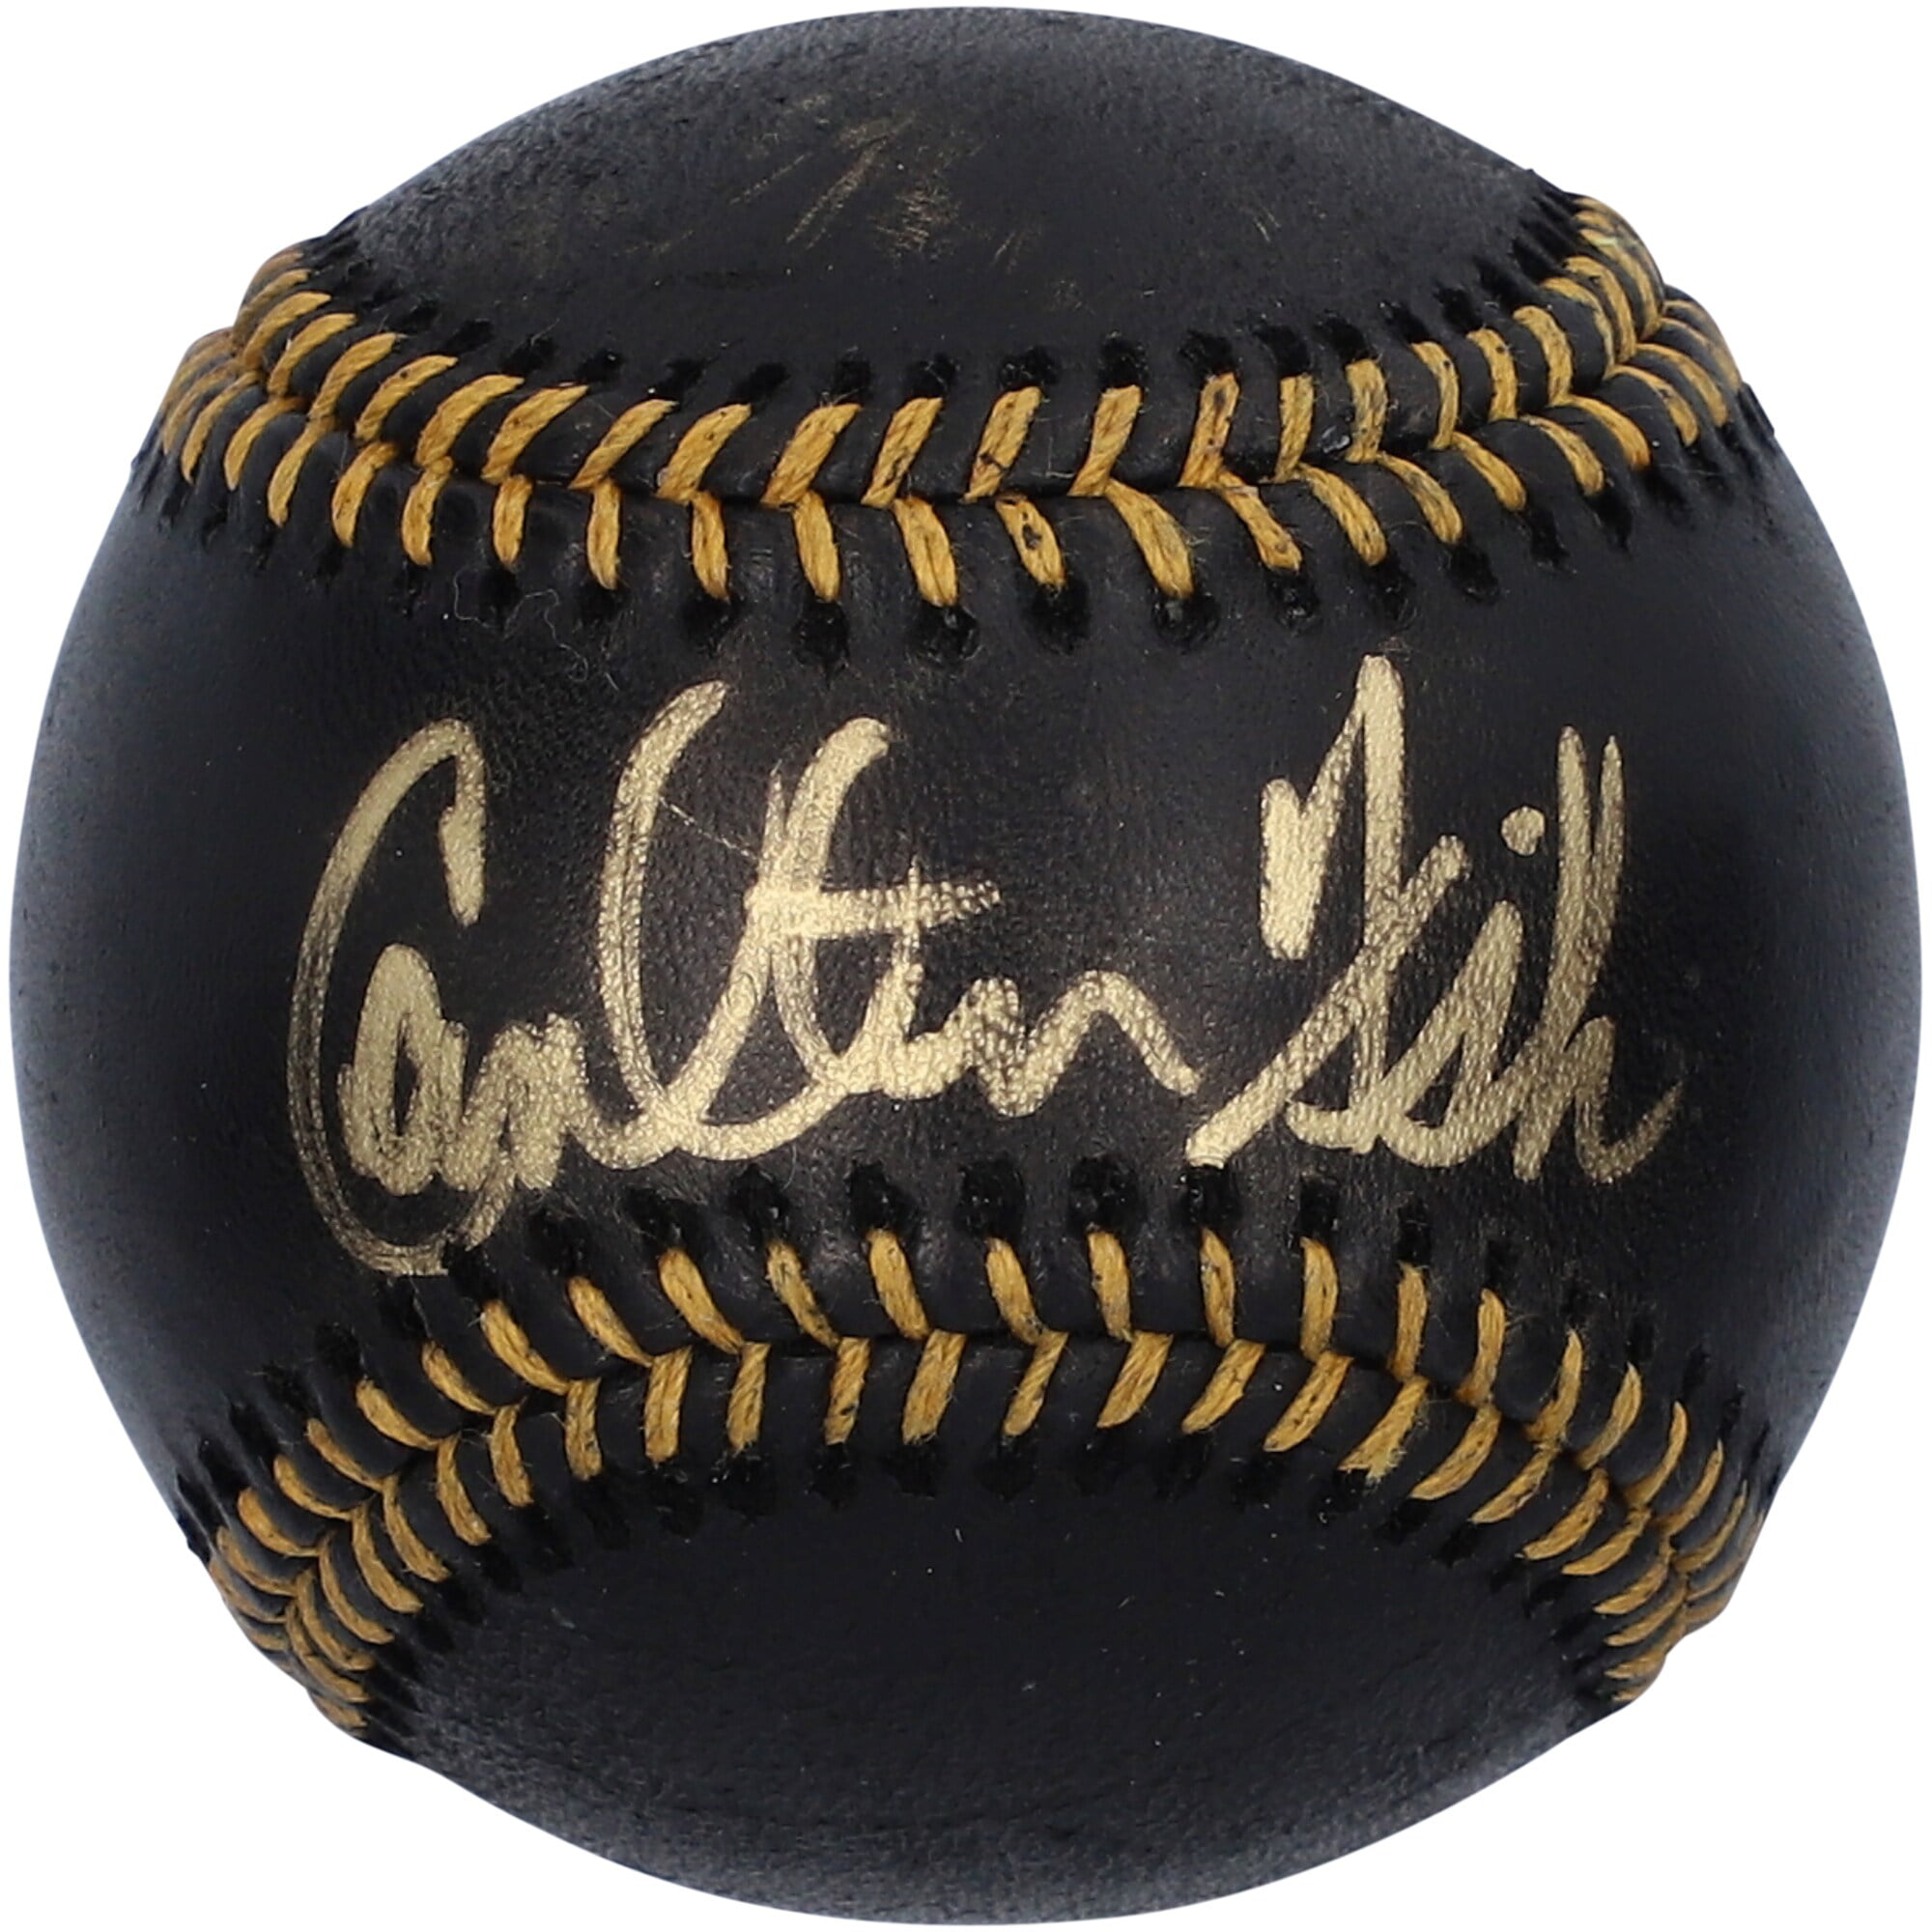 Carlton Fisk Boston Red Sox Autographed Hall of Fame Baseball